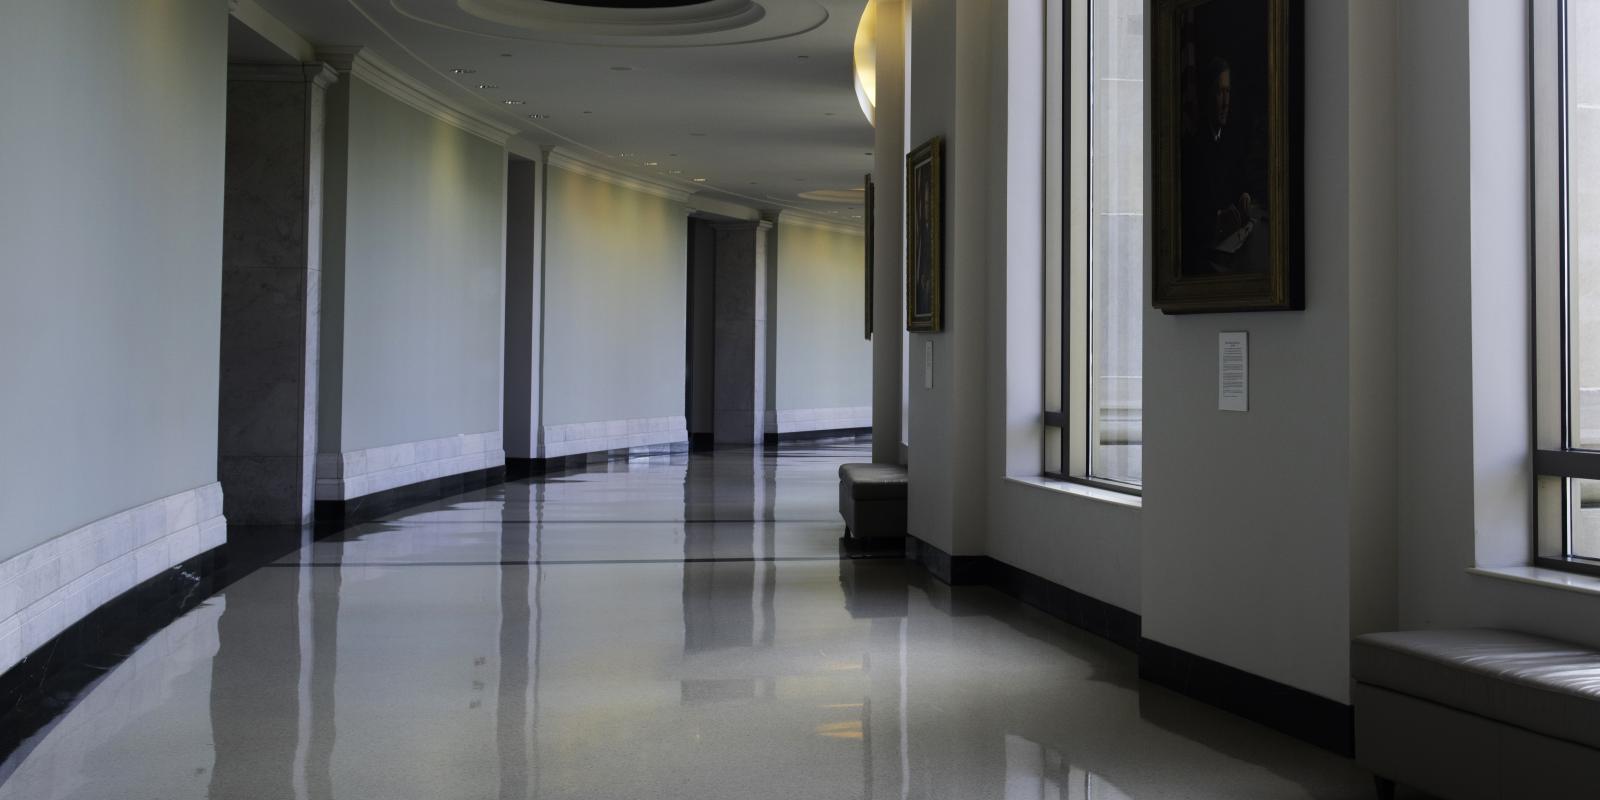 2nd floor hallway of the modern Courthouse